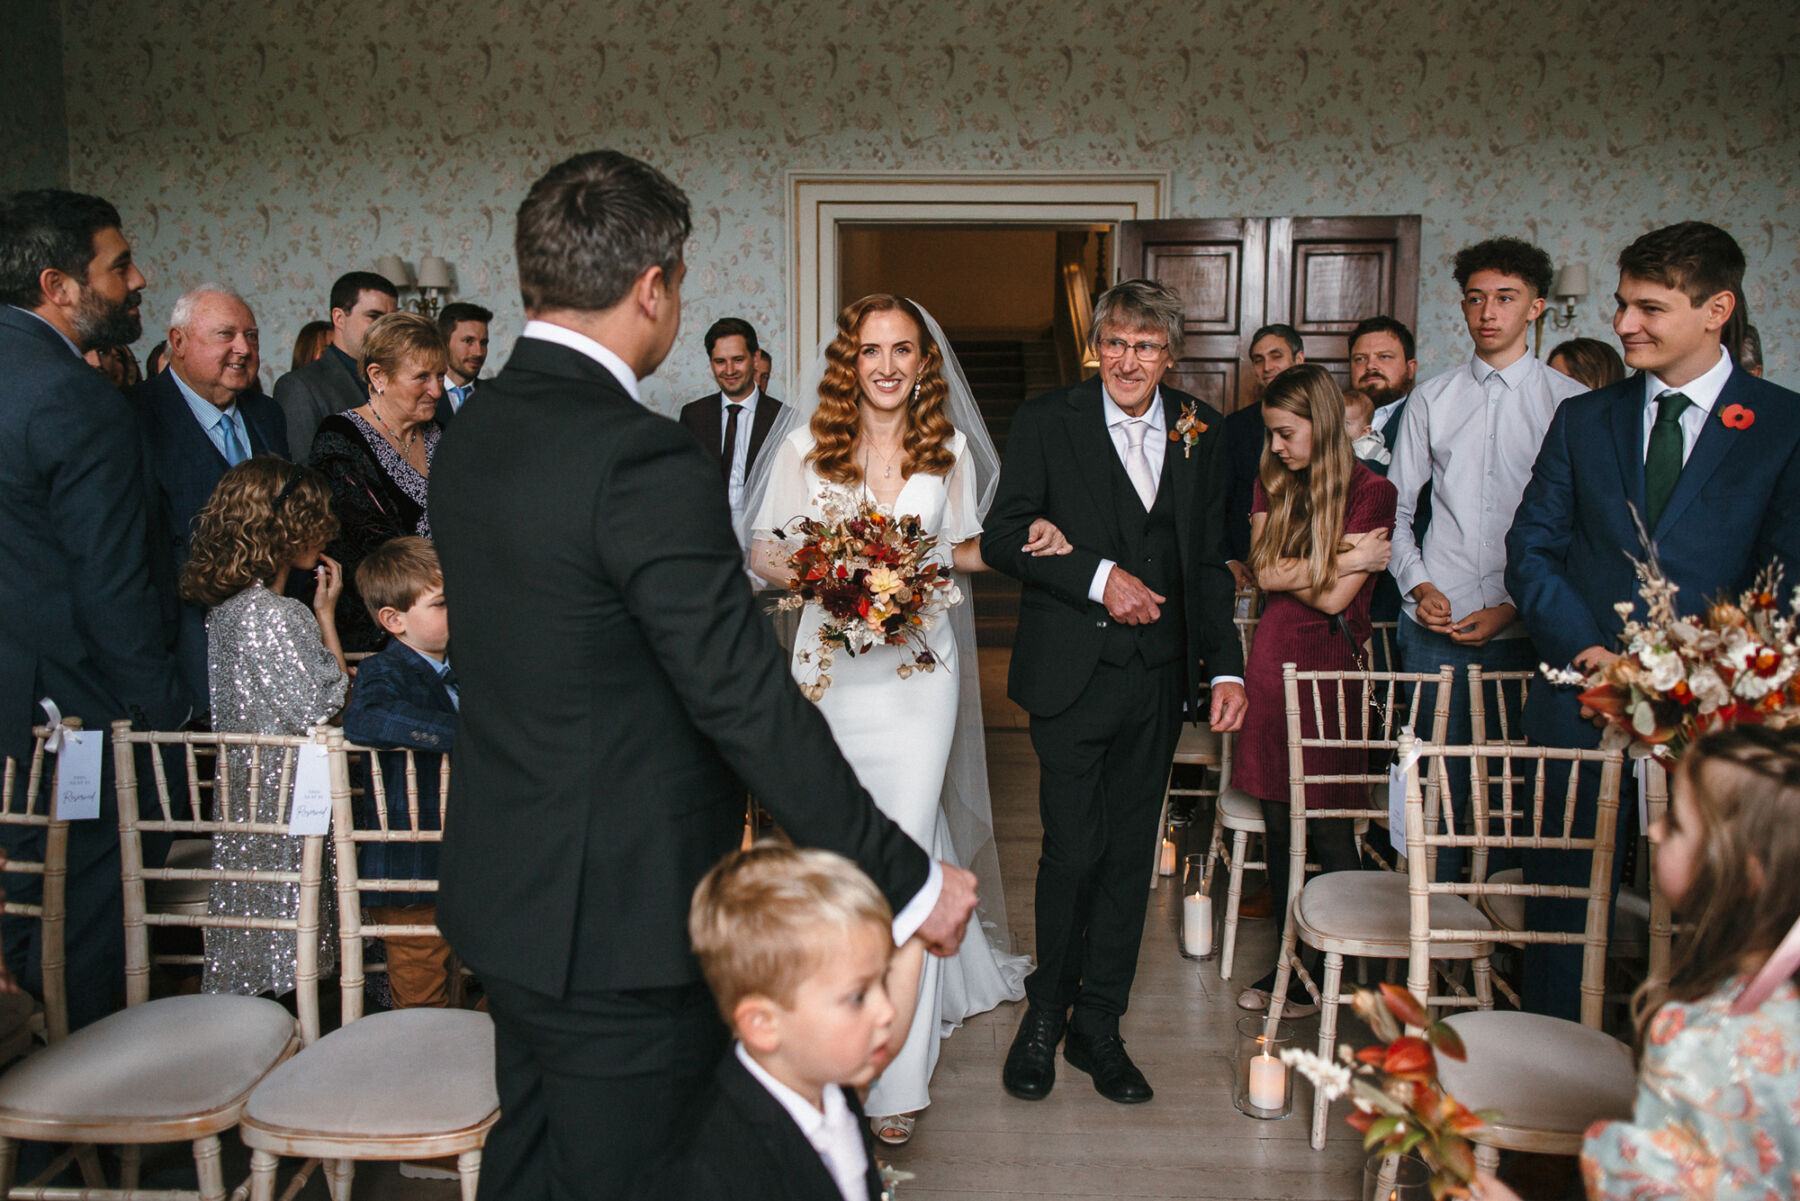 Bride with her father entering the ceremony room at Pynes House in Devon. She carries an Autumn wedding bouquet and wears long wavy hair and a Suzanne Neville wedding dress.